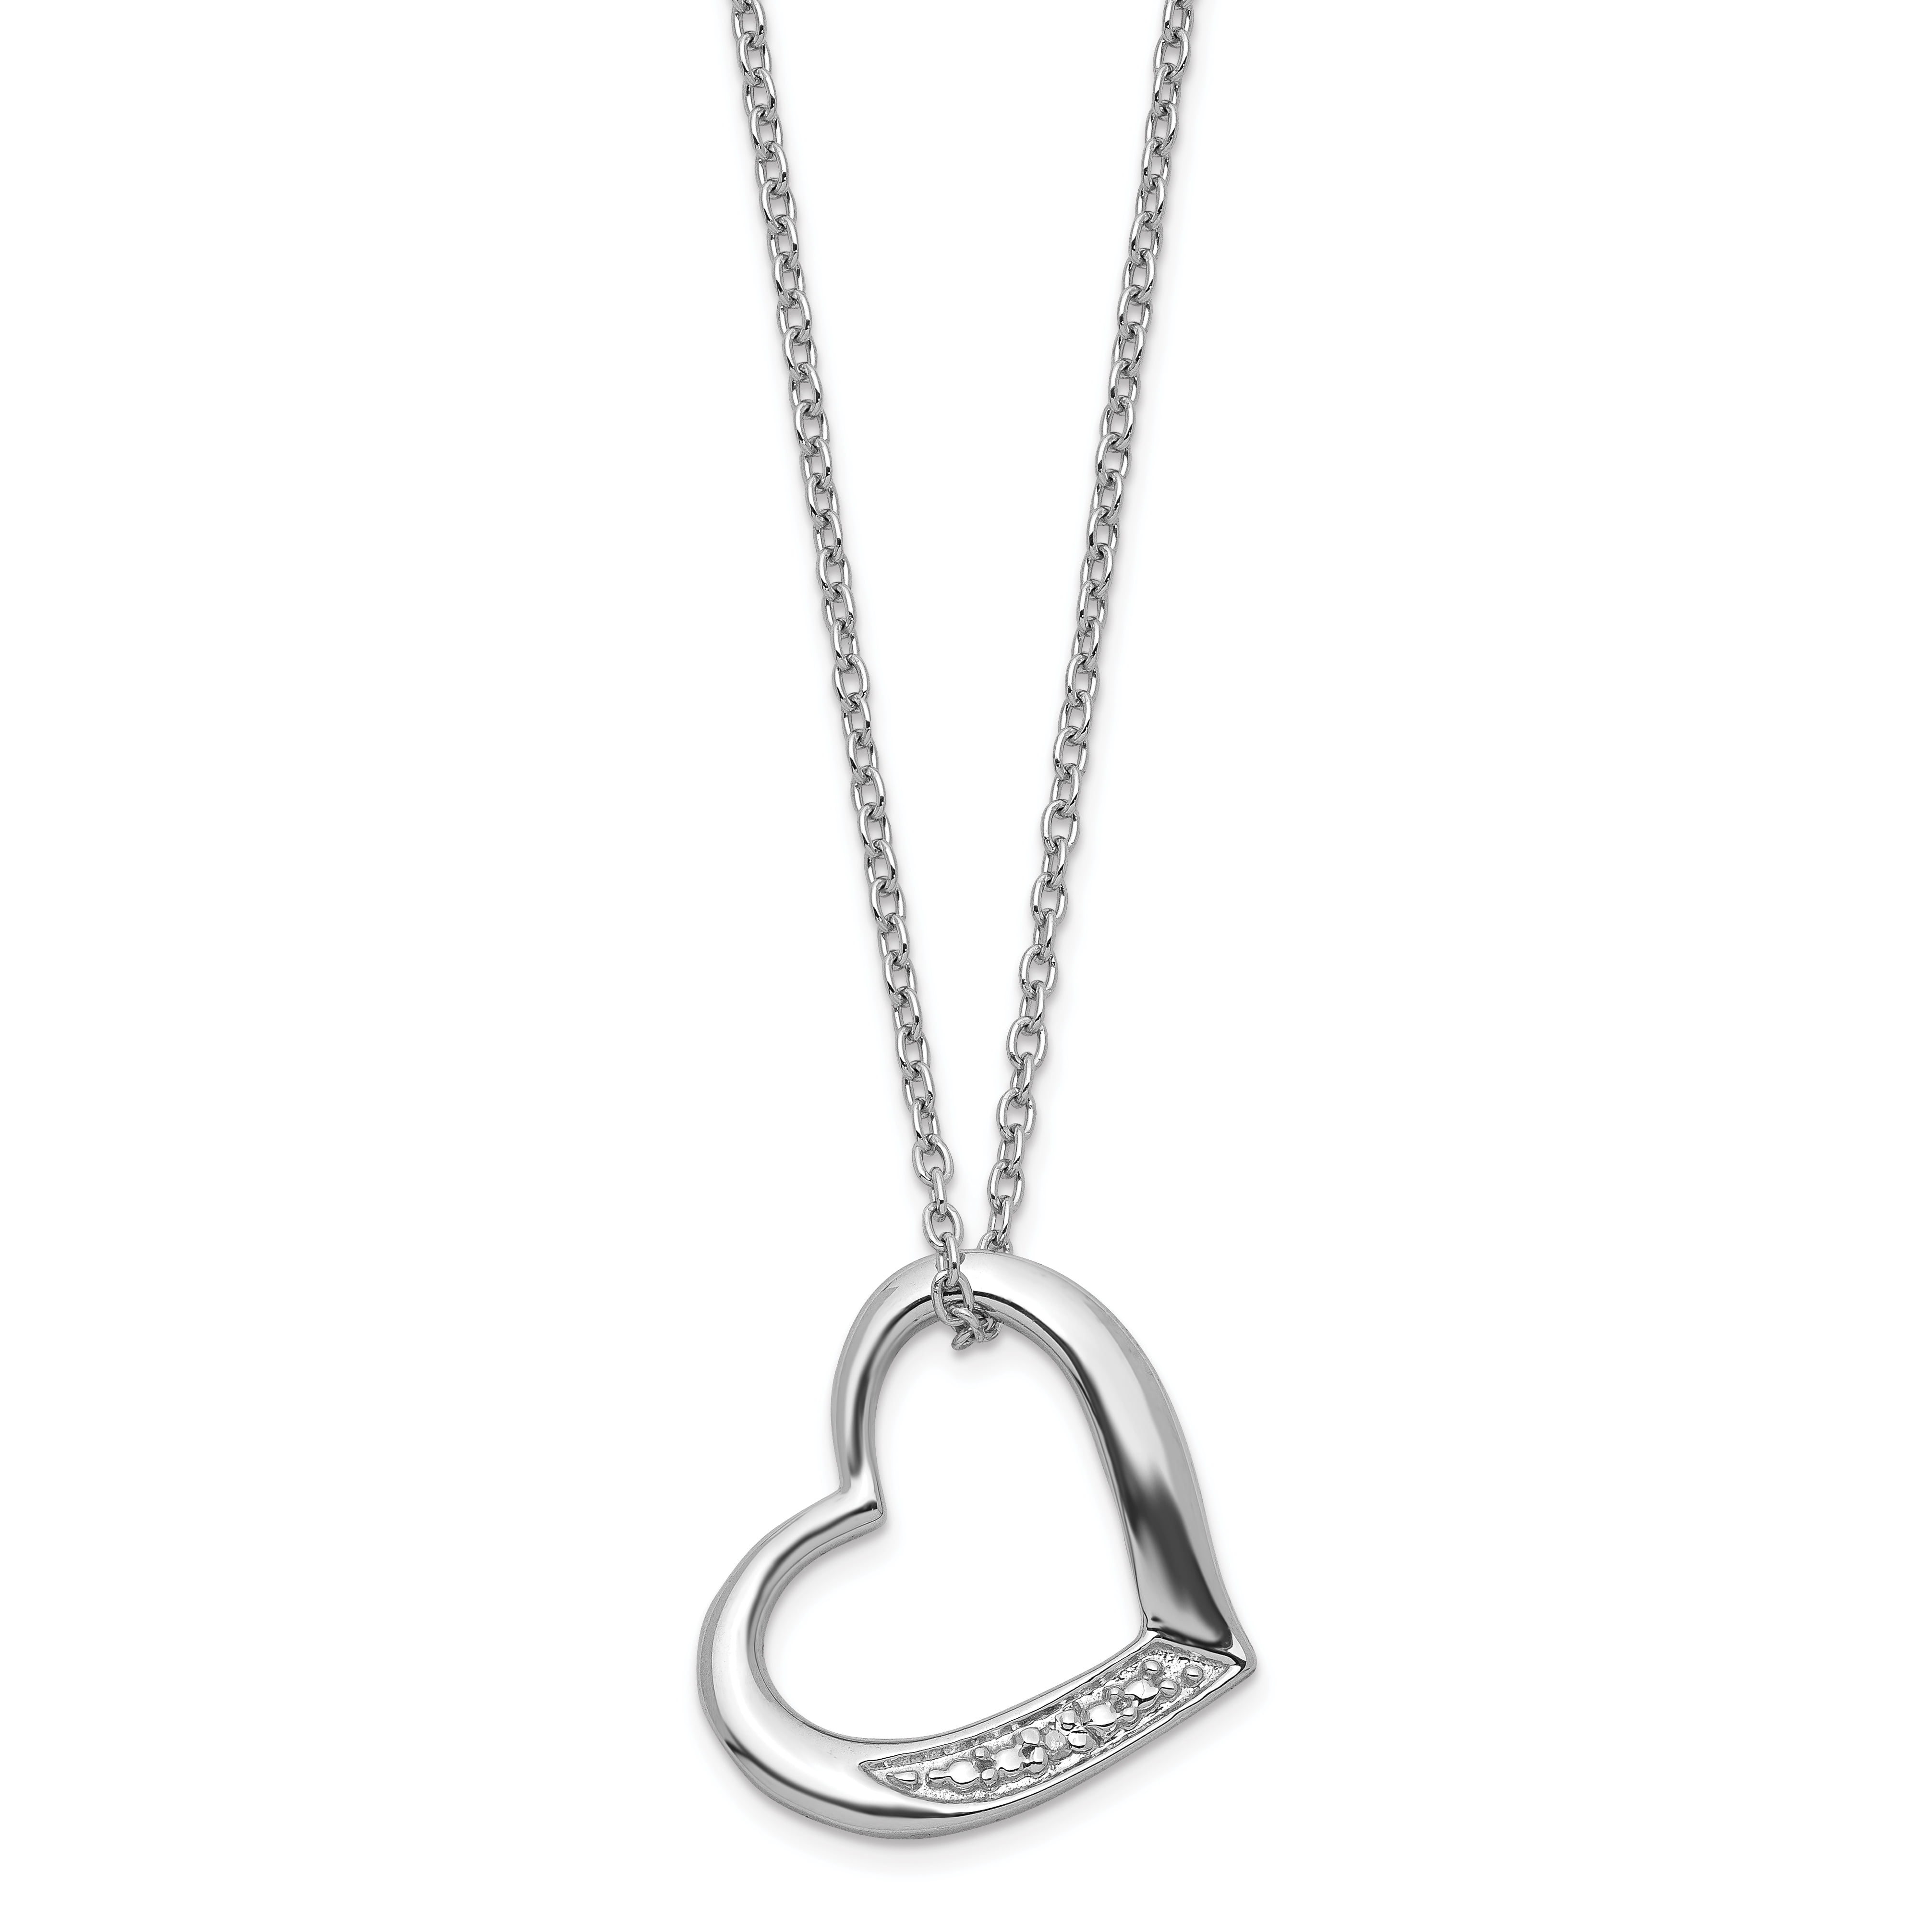 Solid 925 Sterling Silver Lovely Tiny 3D Love Heart Pendant Charm Chain Necklace